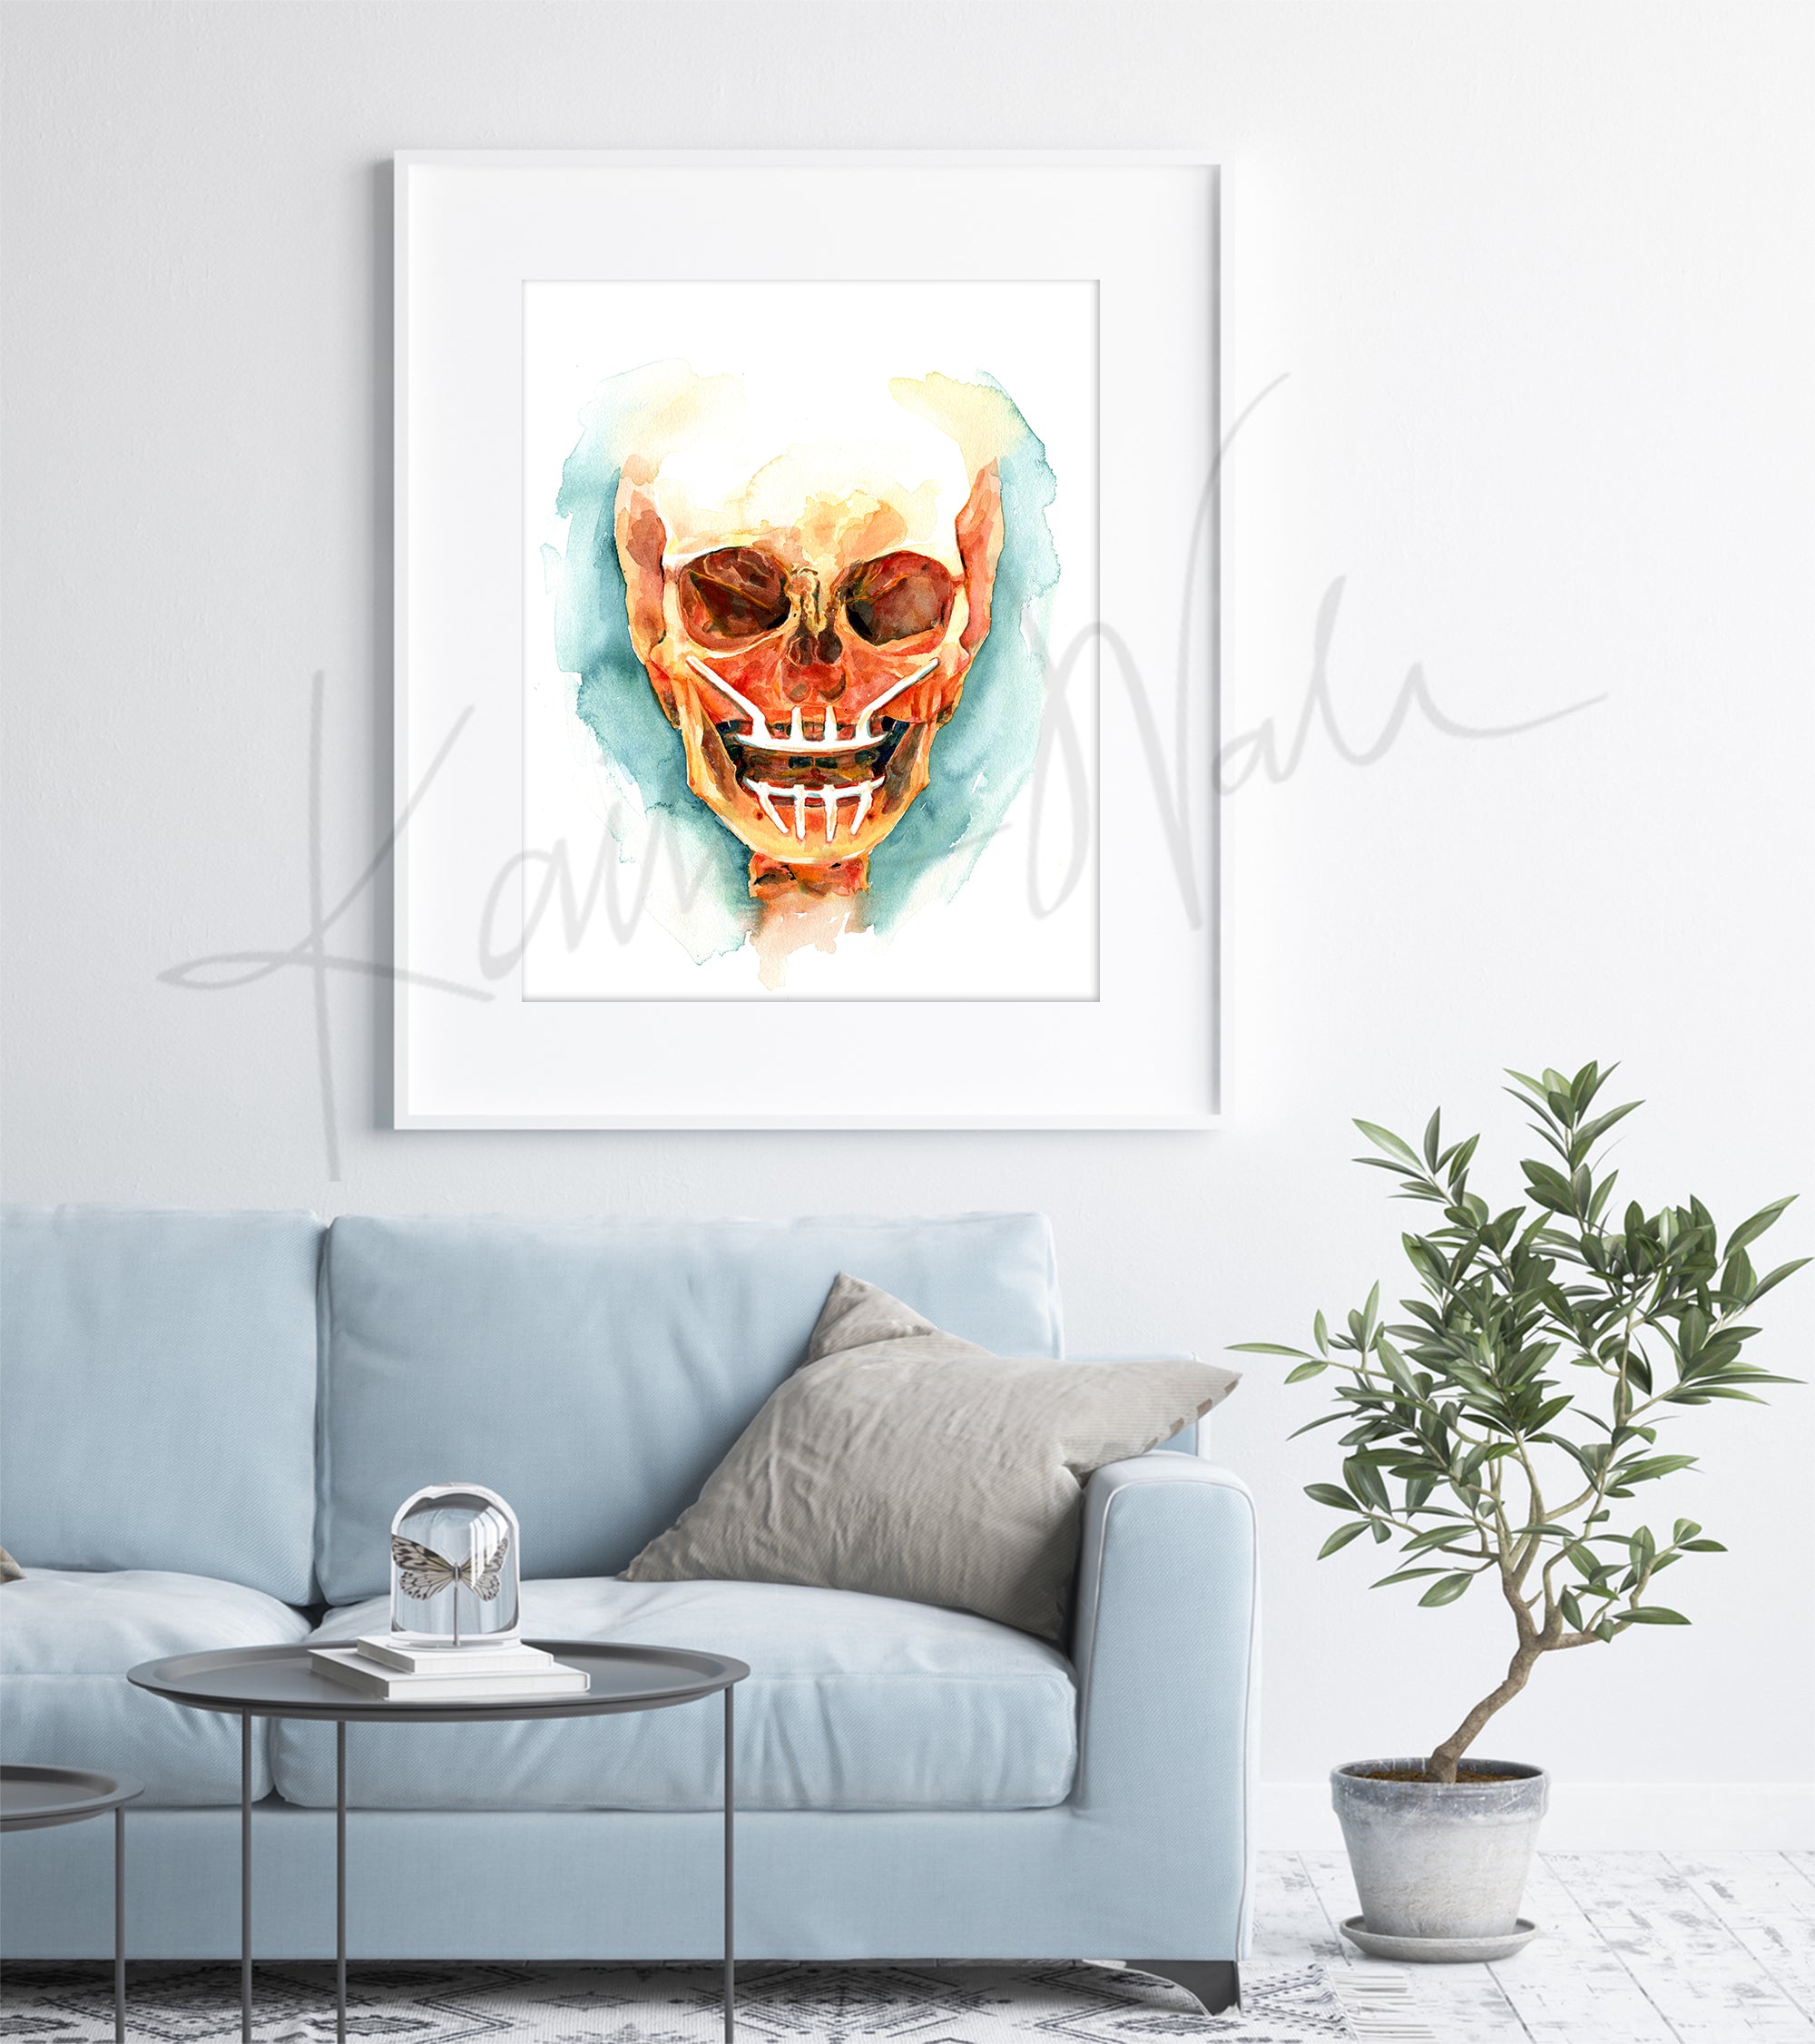 Framed watercolor painting of a mandibular and maxillary all on 4 with two anterior implants and 2 zygomatic implants. The painting is hanging over a blue couch.